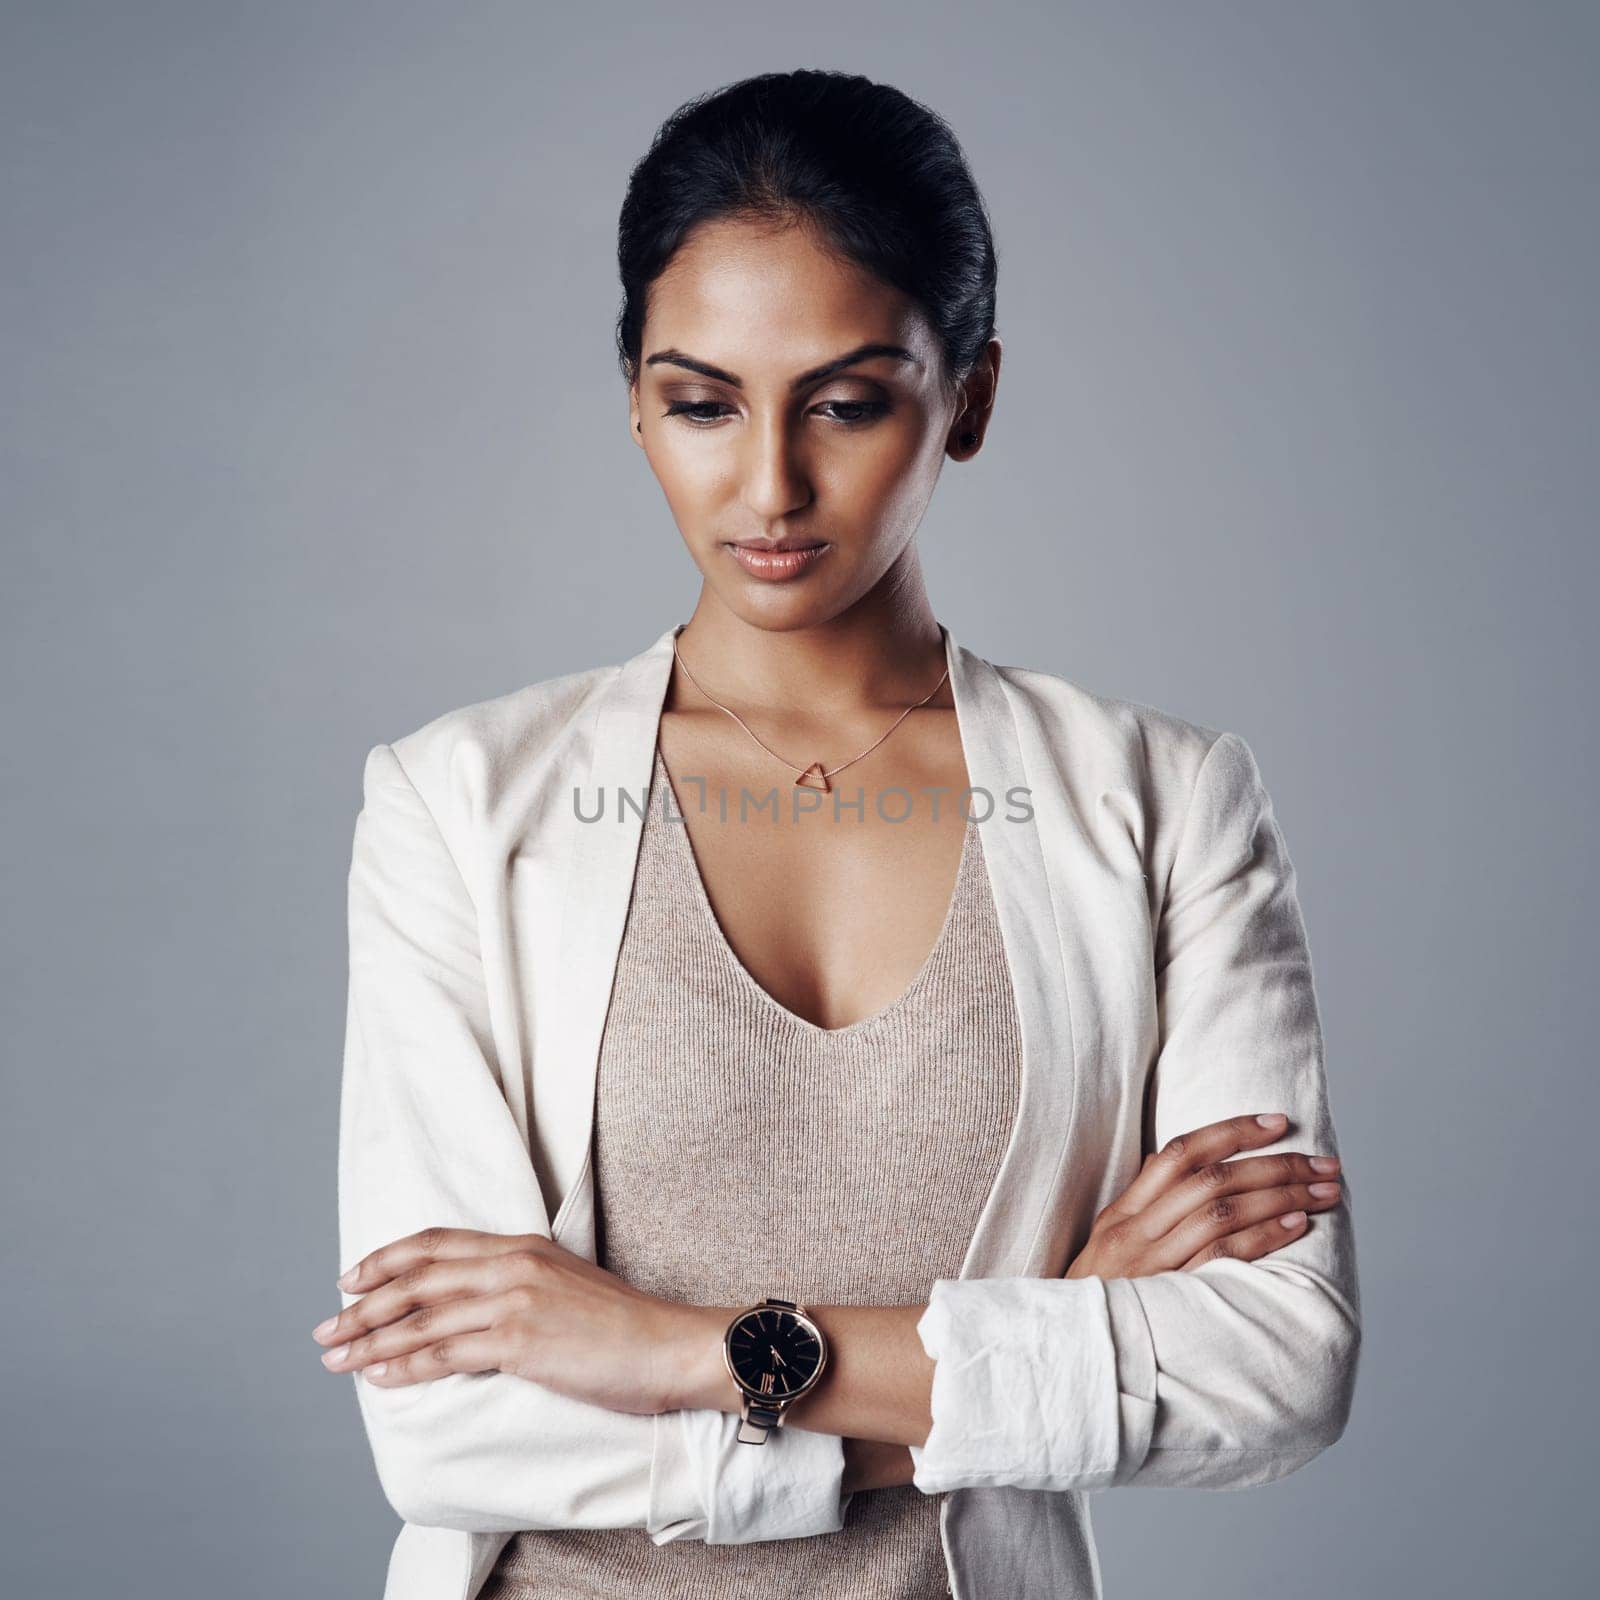 Always mindful of her next business move. Studio shot of a young businesswoman looking pensive against a gray background